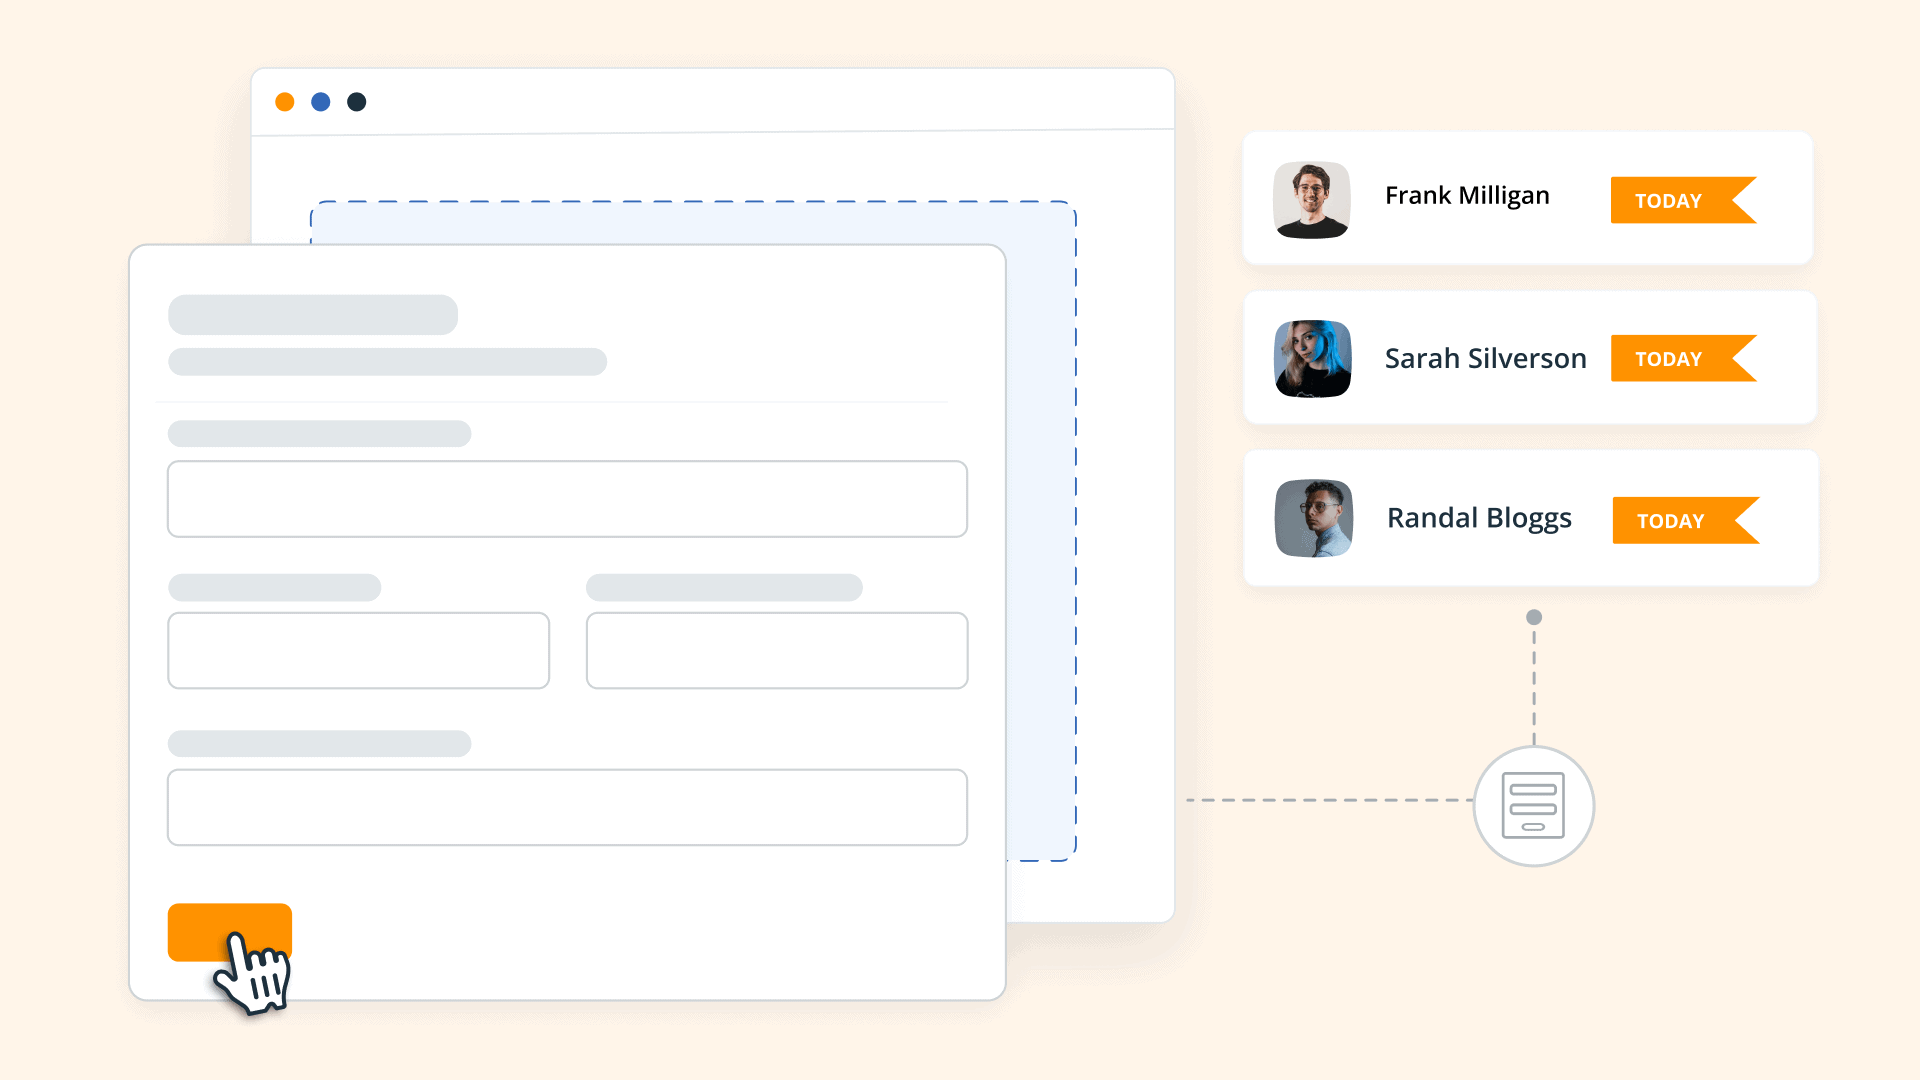 Simple web forms with follow-up reminders